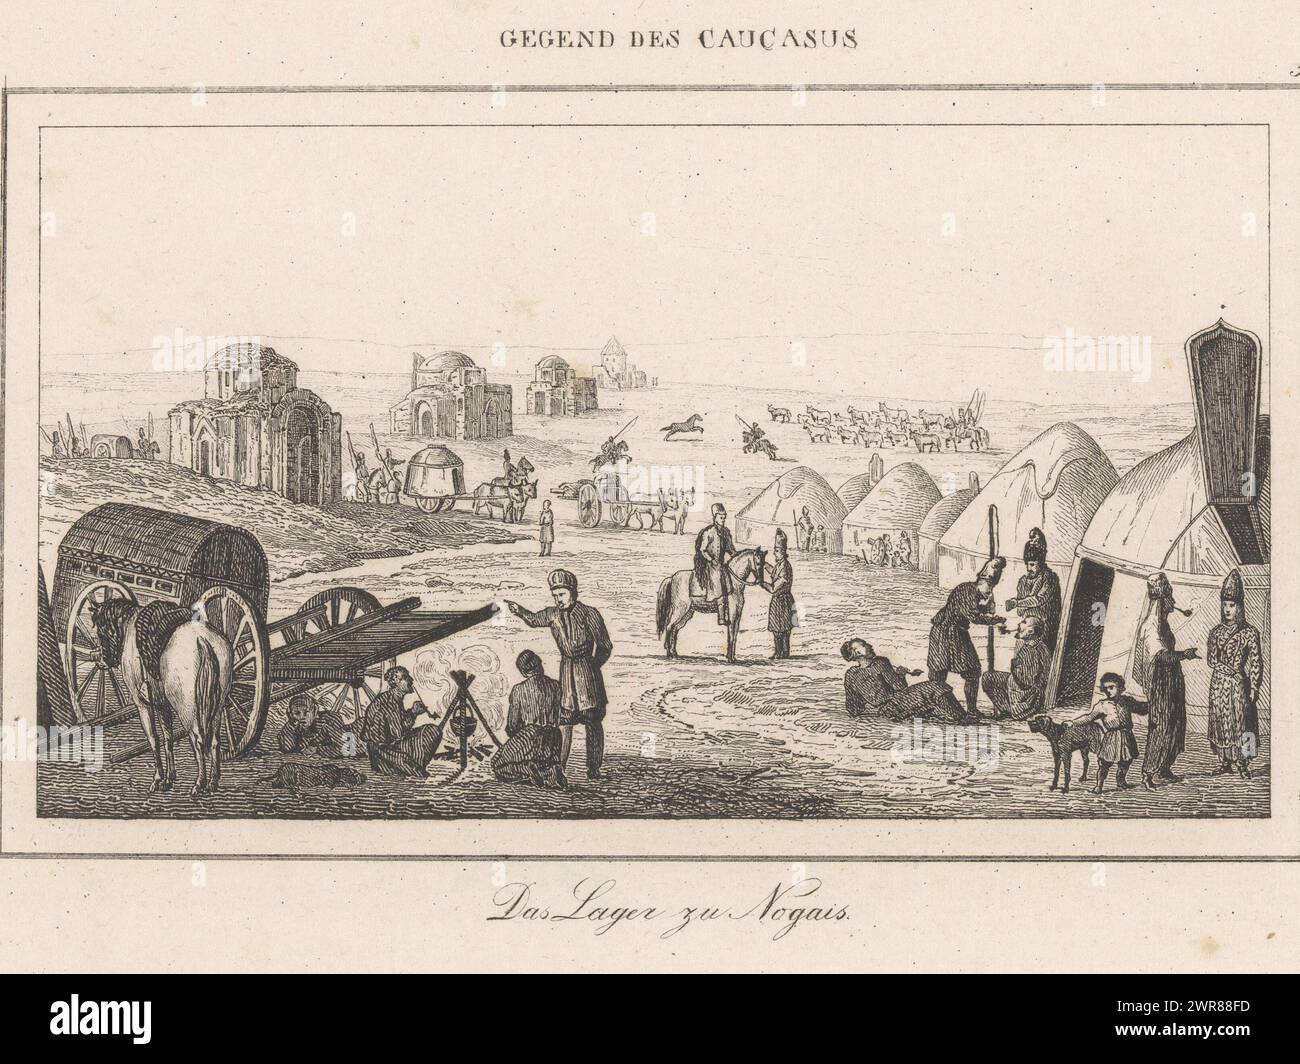 Army camp, Gegend des Caucasus / Das Lager zu Nogais (title on object), Figures from the Caucasus (series title), Numbered top right: 5., print maker: anonymous, publisher: Firmin Didot frères, (possibly), Germany, (possibly), 1800 - 1899, paper, height 140 mm × width 228 mm, print Stock Photo